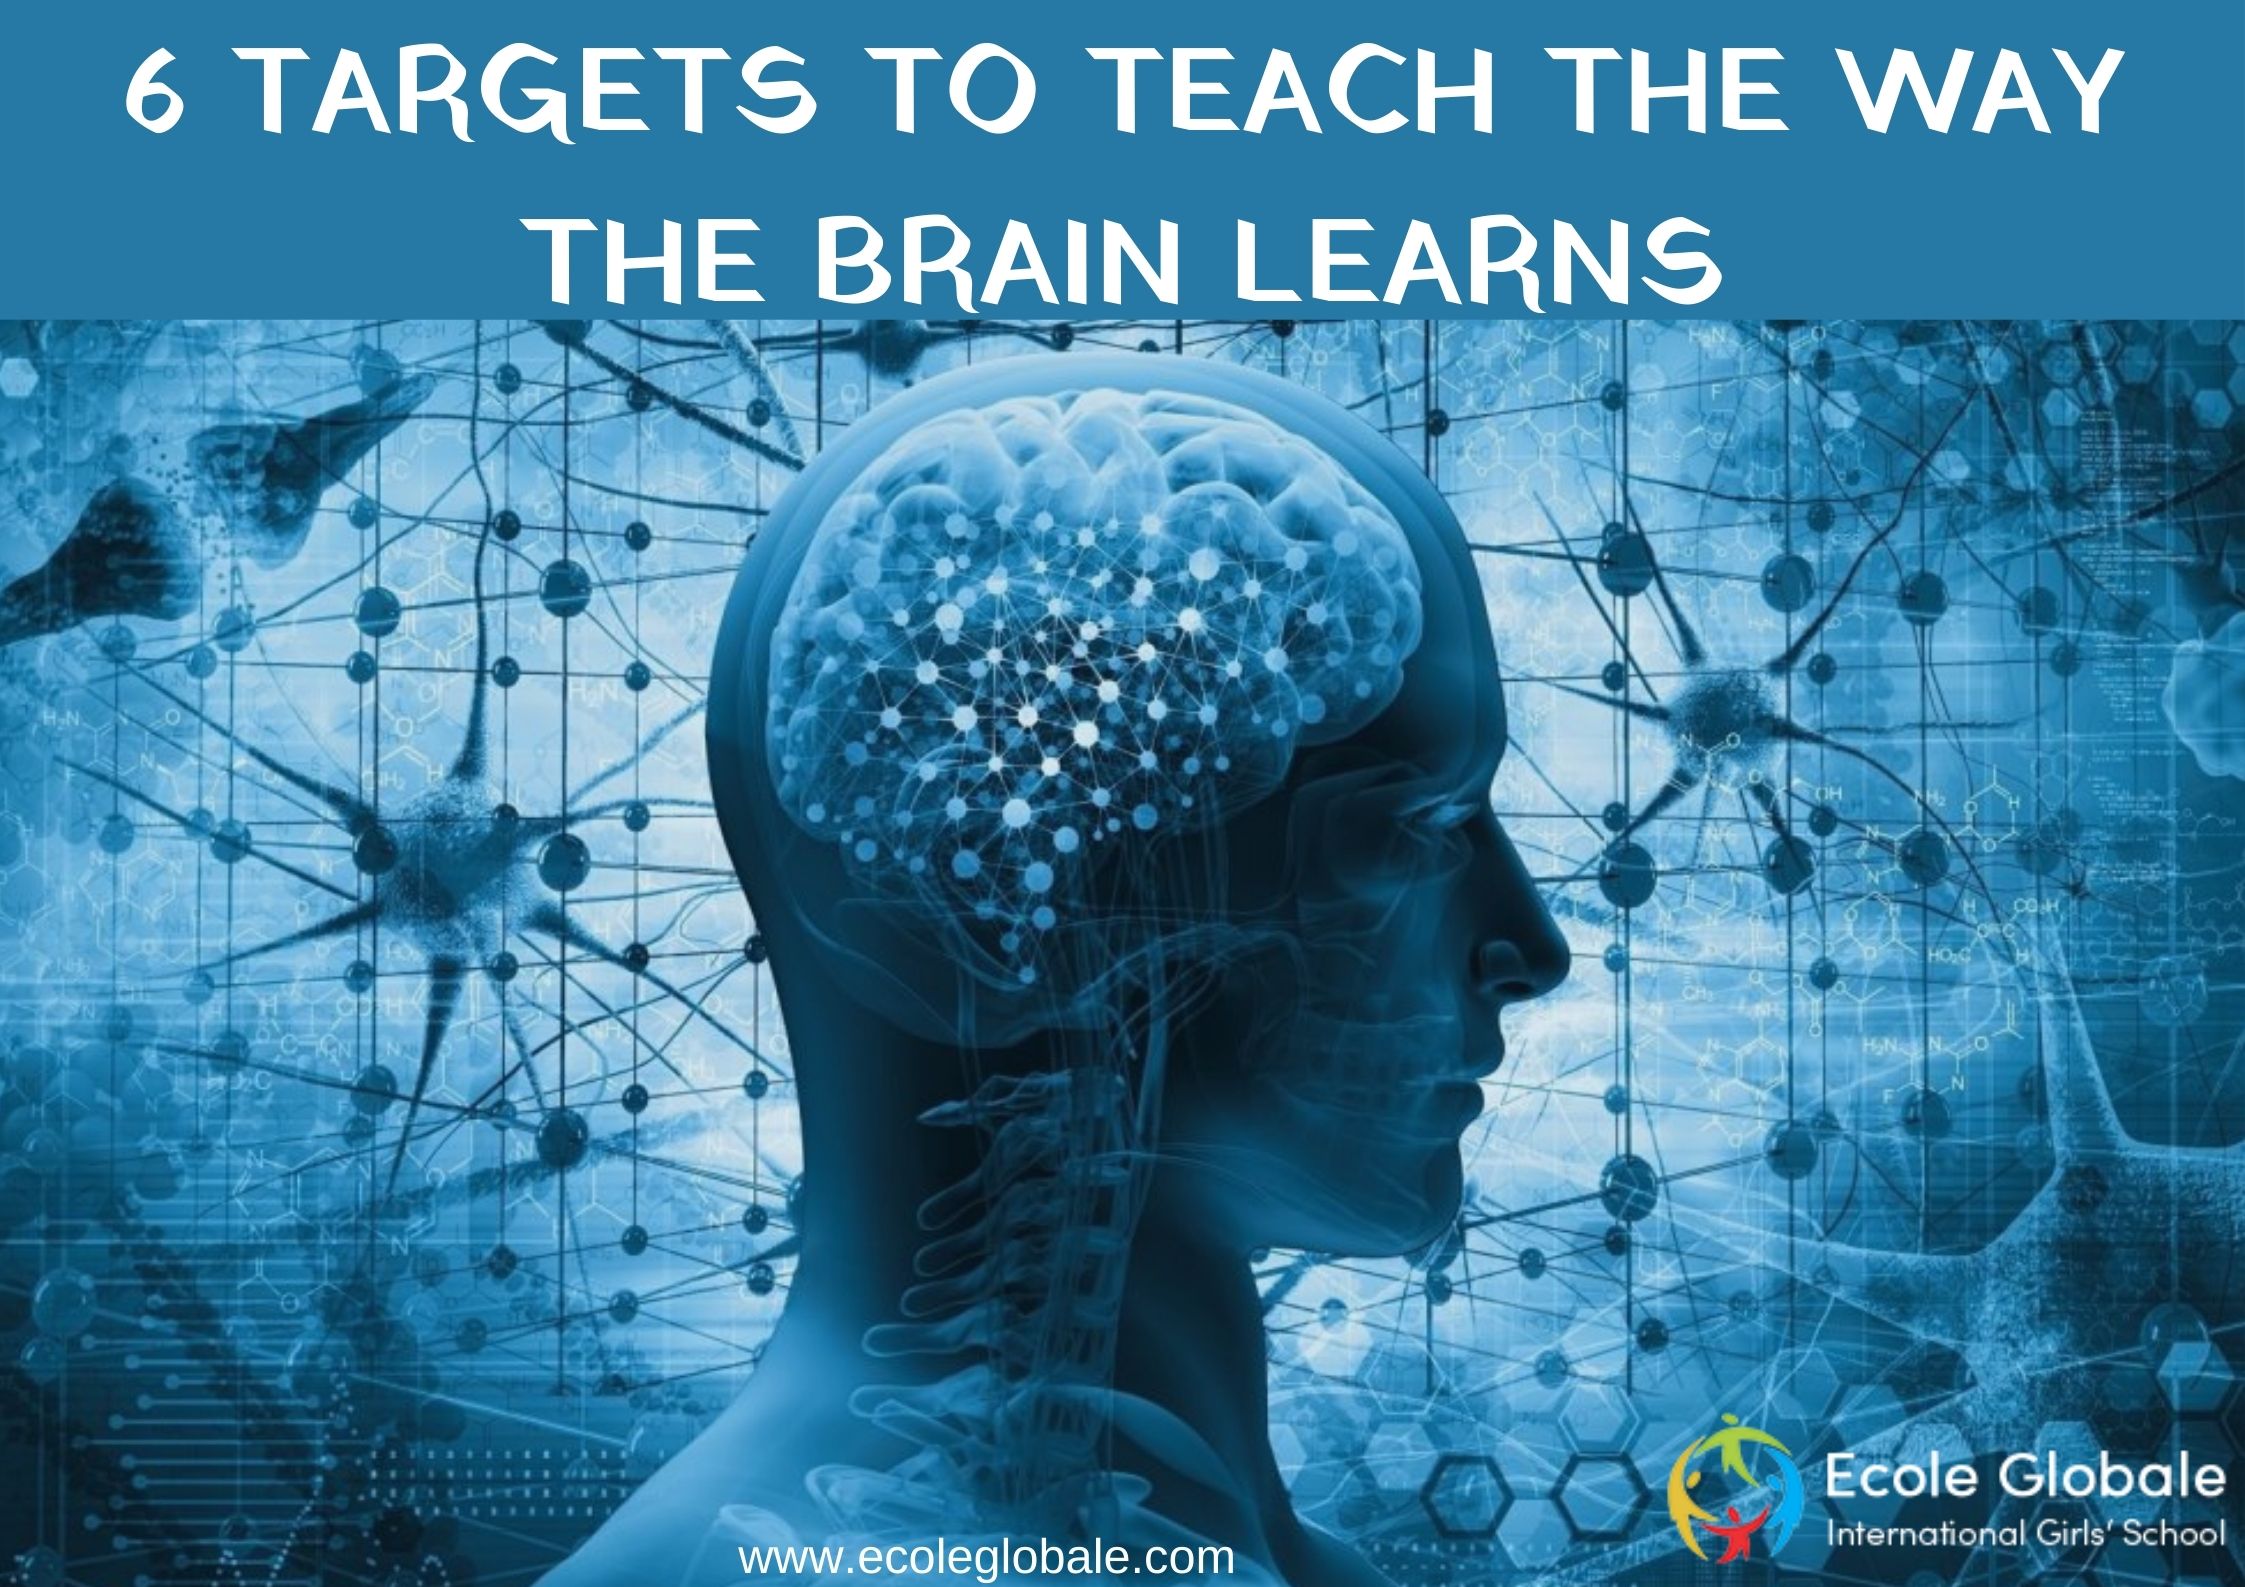 You are currently viewing 6 TARGETS TO TEACH THE WAY THE BRAIN LEARNS